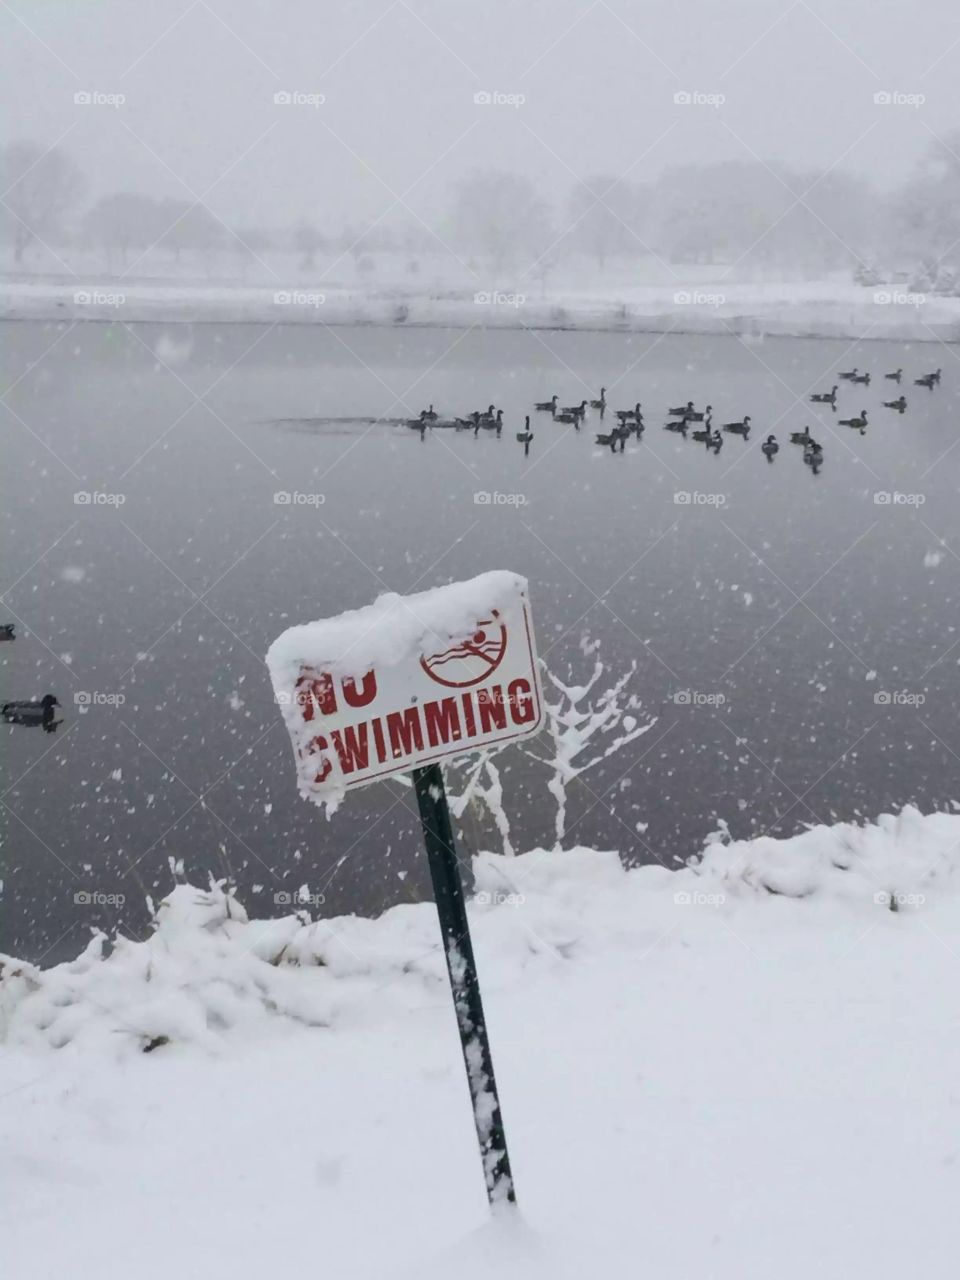 Geese don't care what the sign says! 